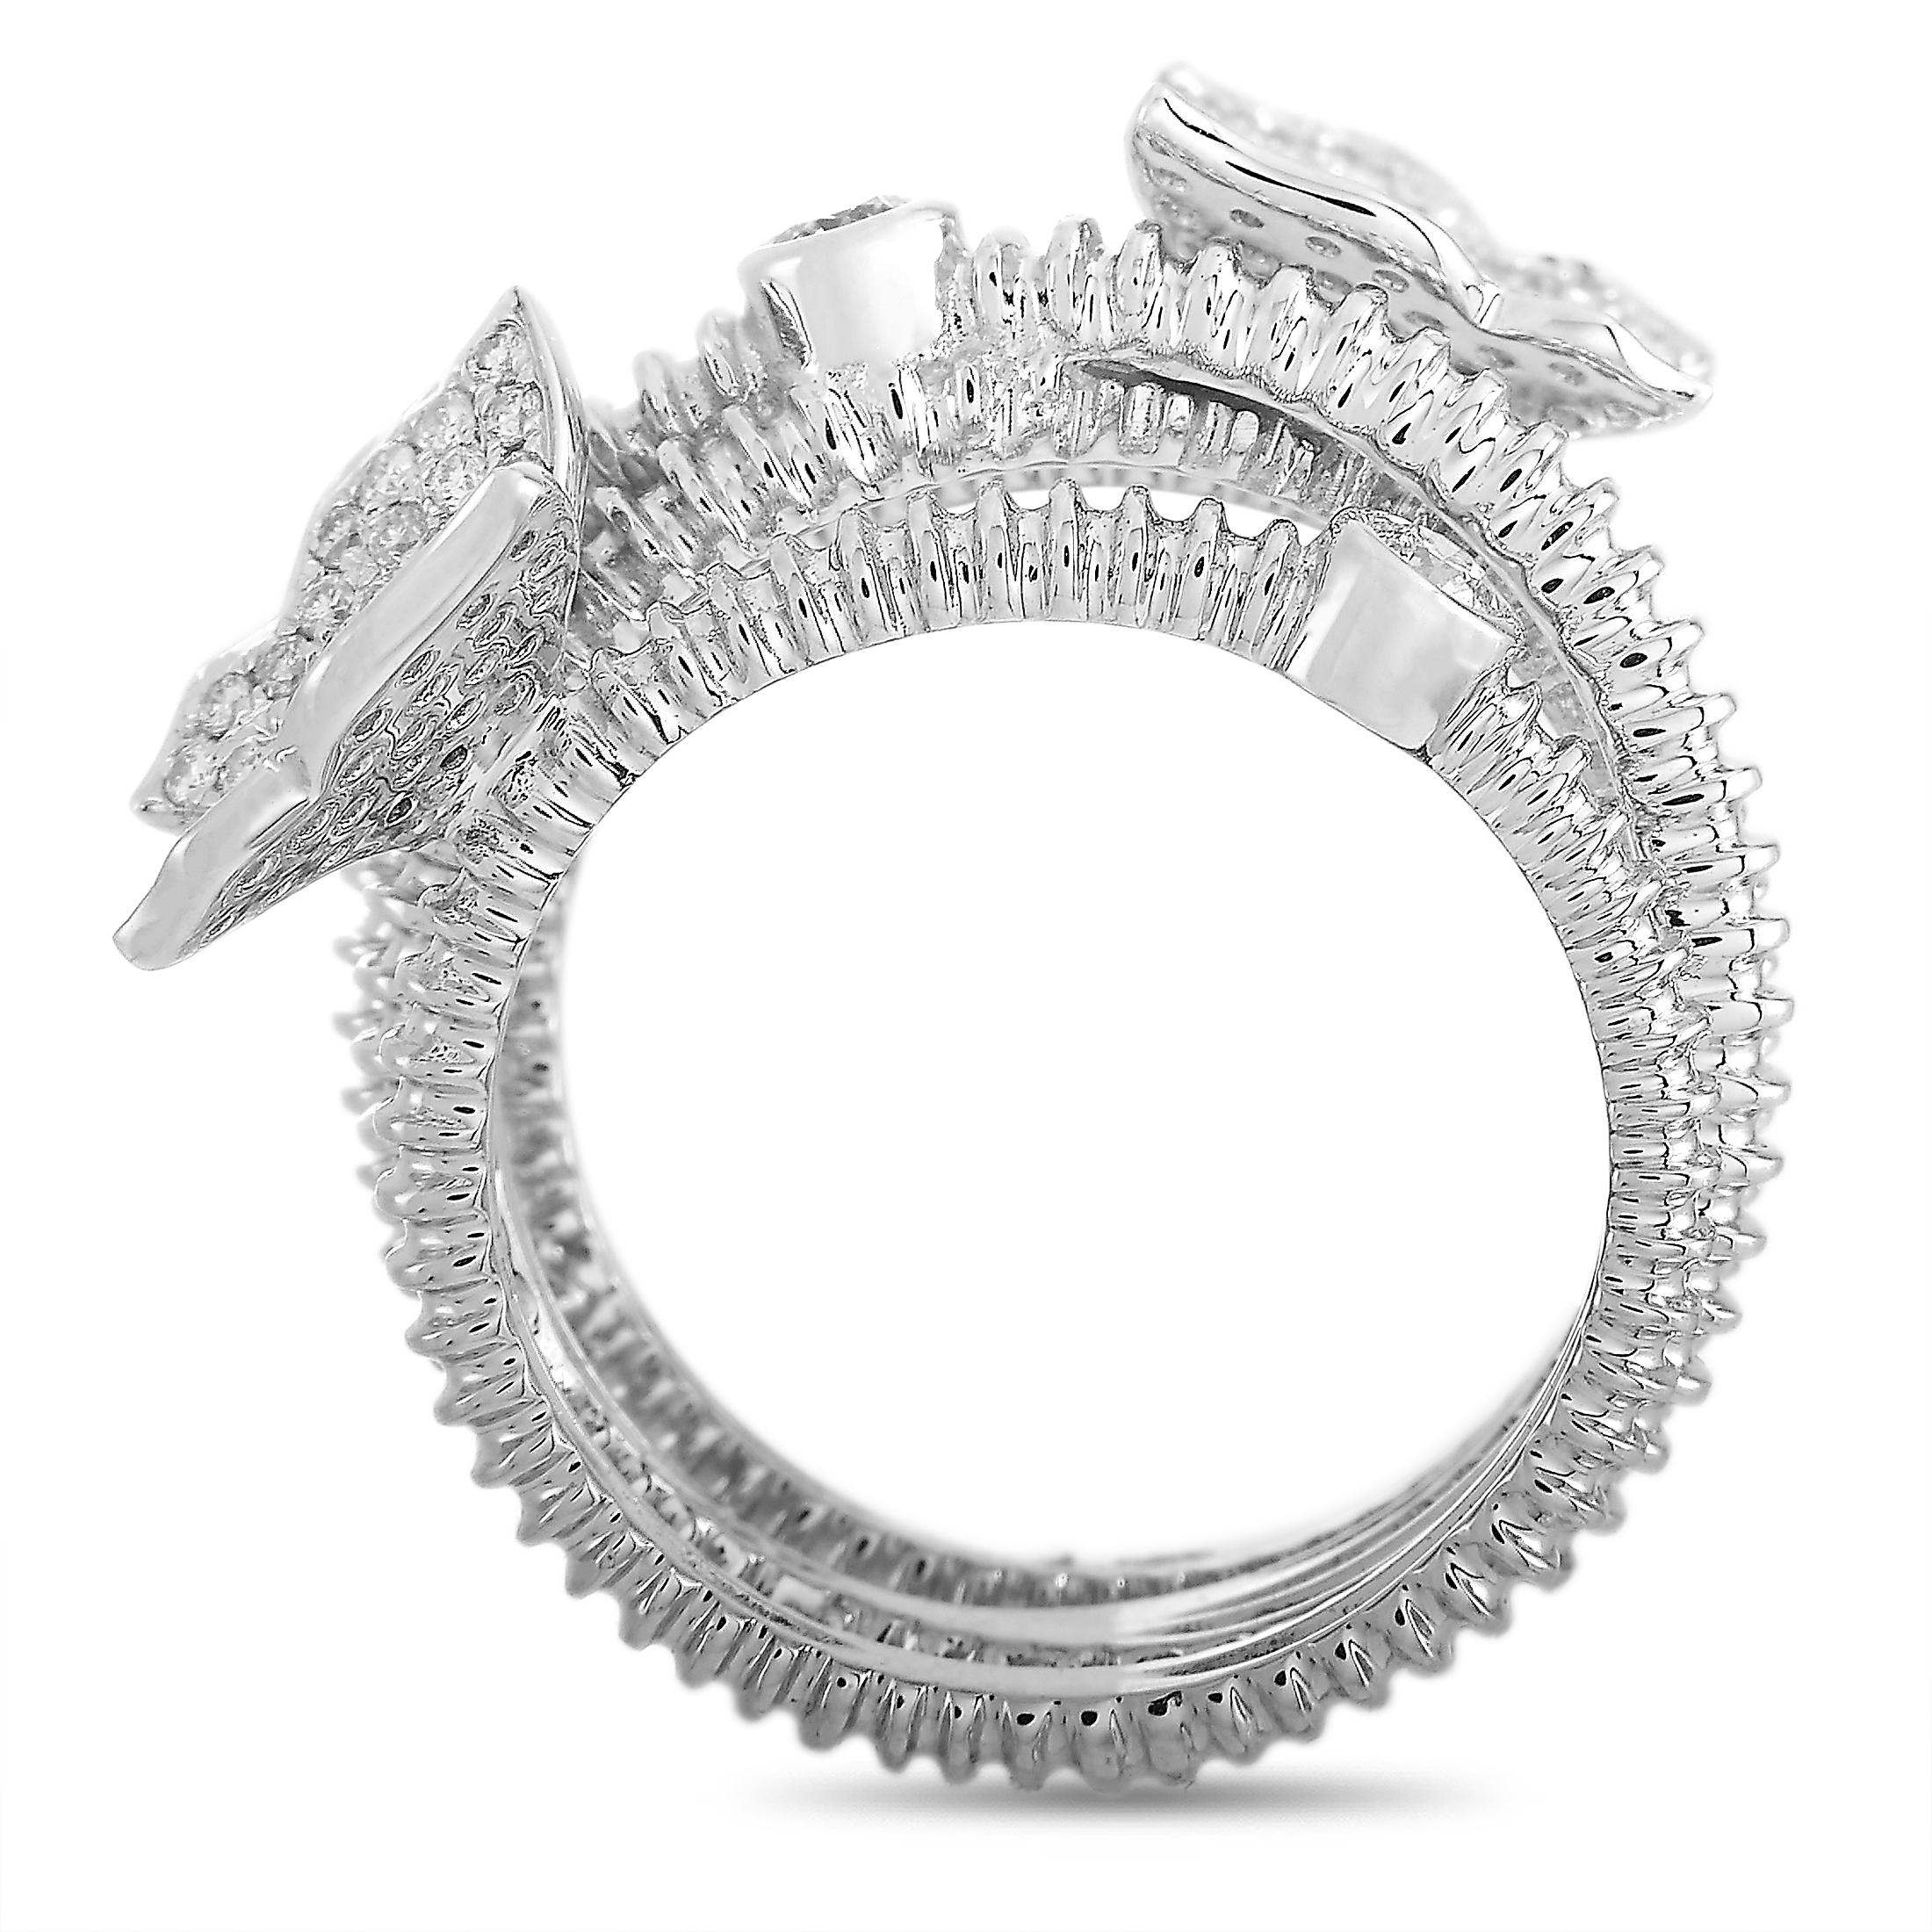 This LB Exclusive ring is made of 18K white gold and embellished with diamonds that amount to 0.65 carats. The ring weighs 10.9 grams and boasts band thickness of 5 mm and top height of 6 mm, while top dimensions measure 17 by 25 mm.
 
 Offered in